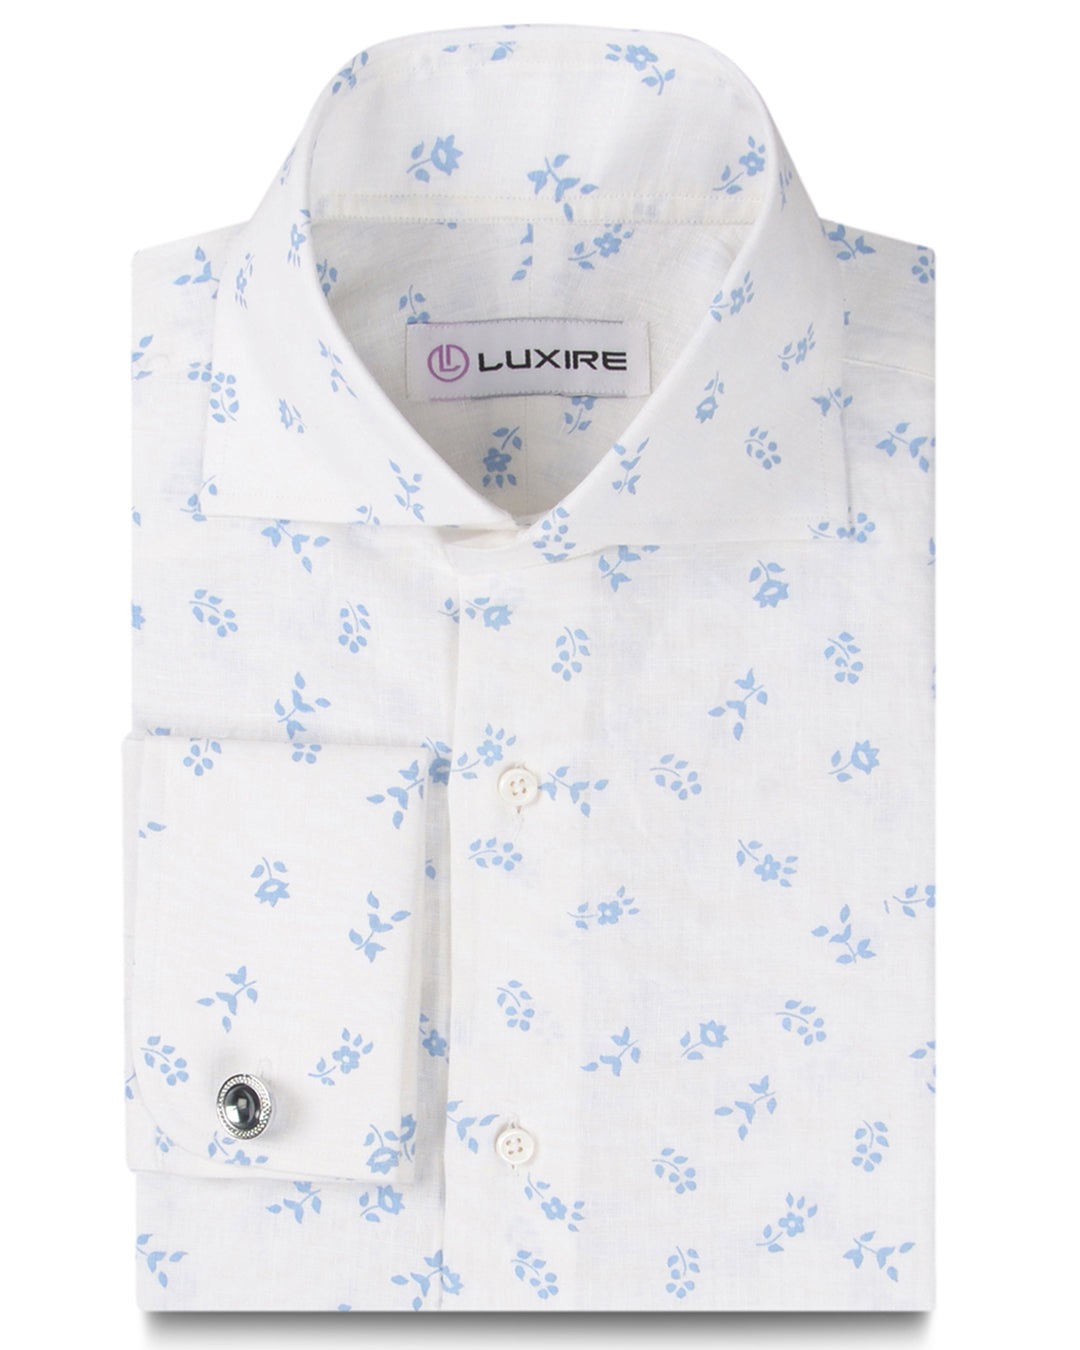 Front view of custom linen shirt for men in blue printed leaves